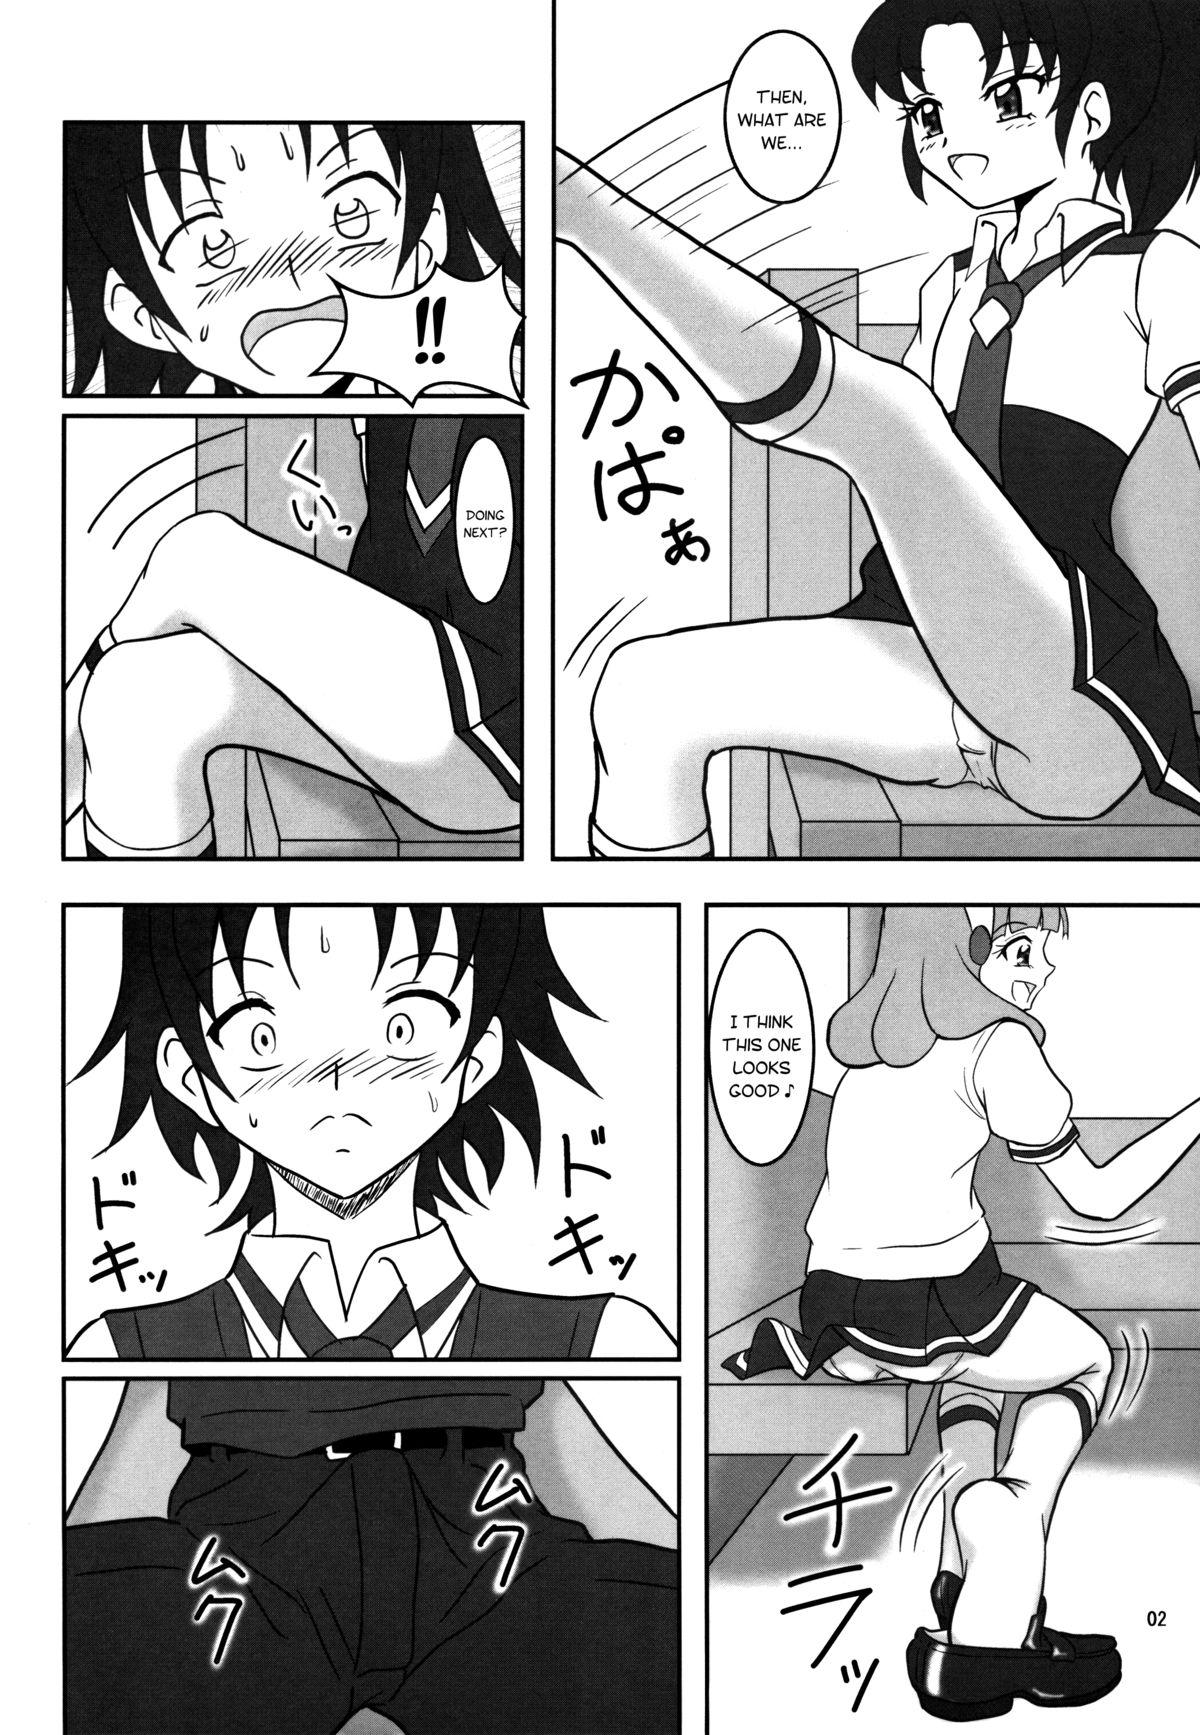 Tied Smell Zuricure | Smell Footycure - Smile precure Bang Bros - Page 3